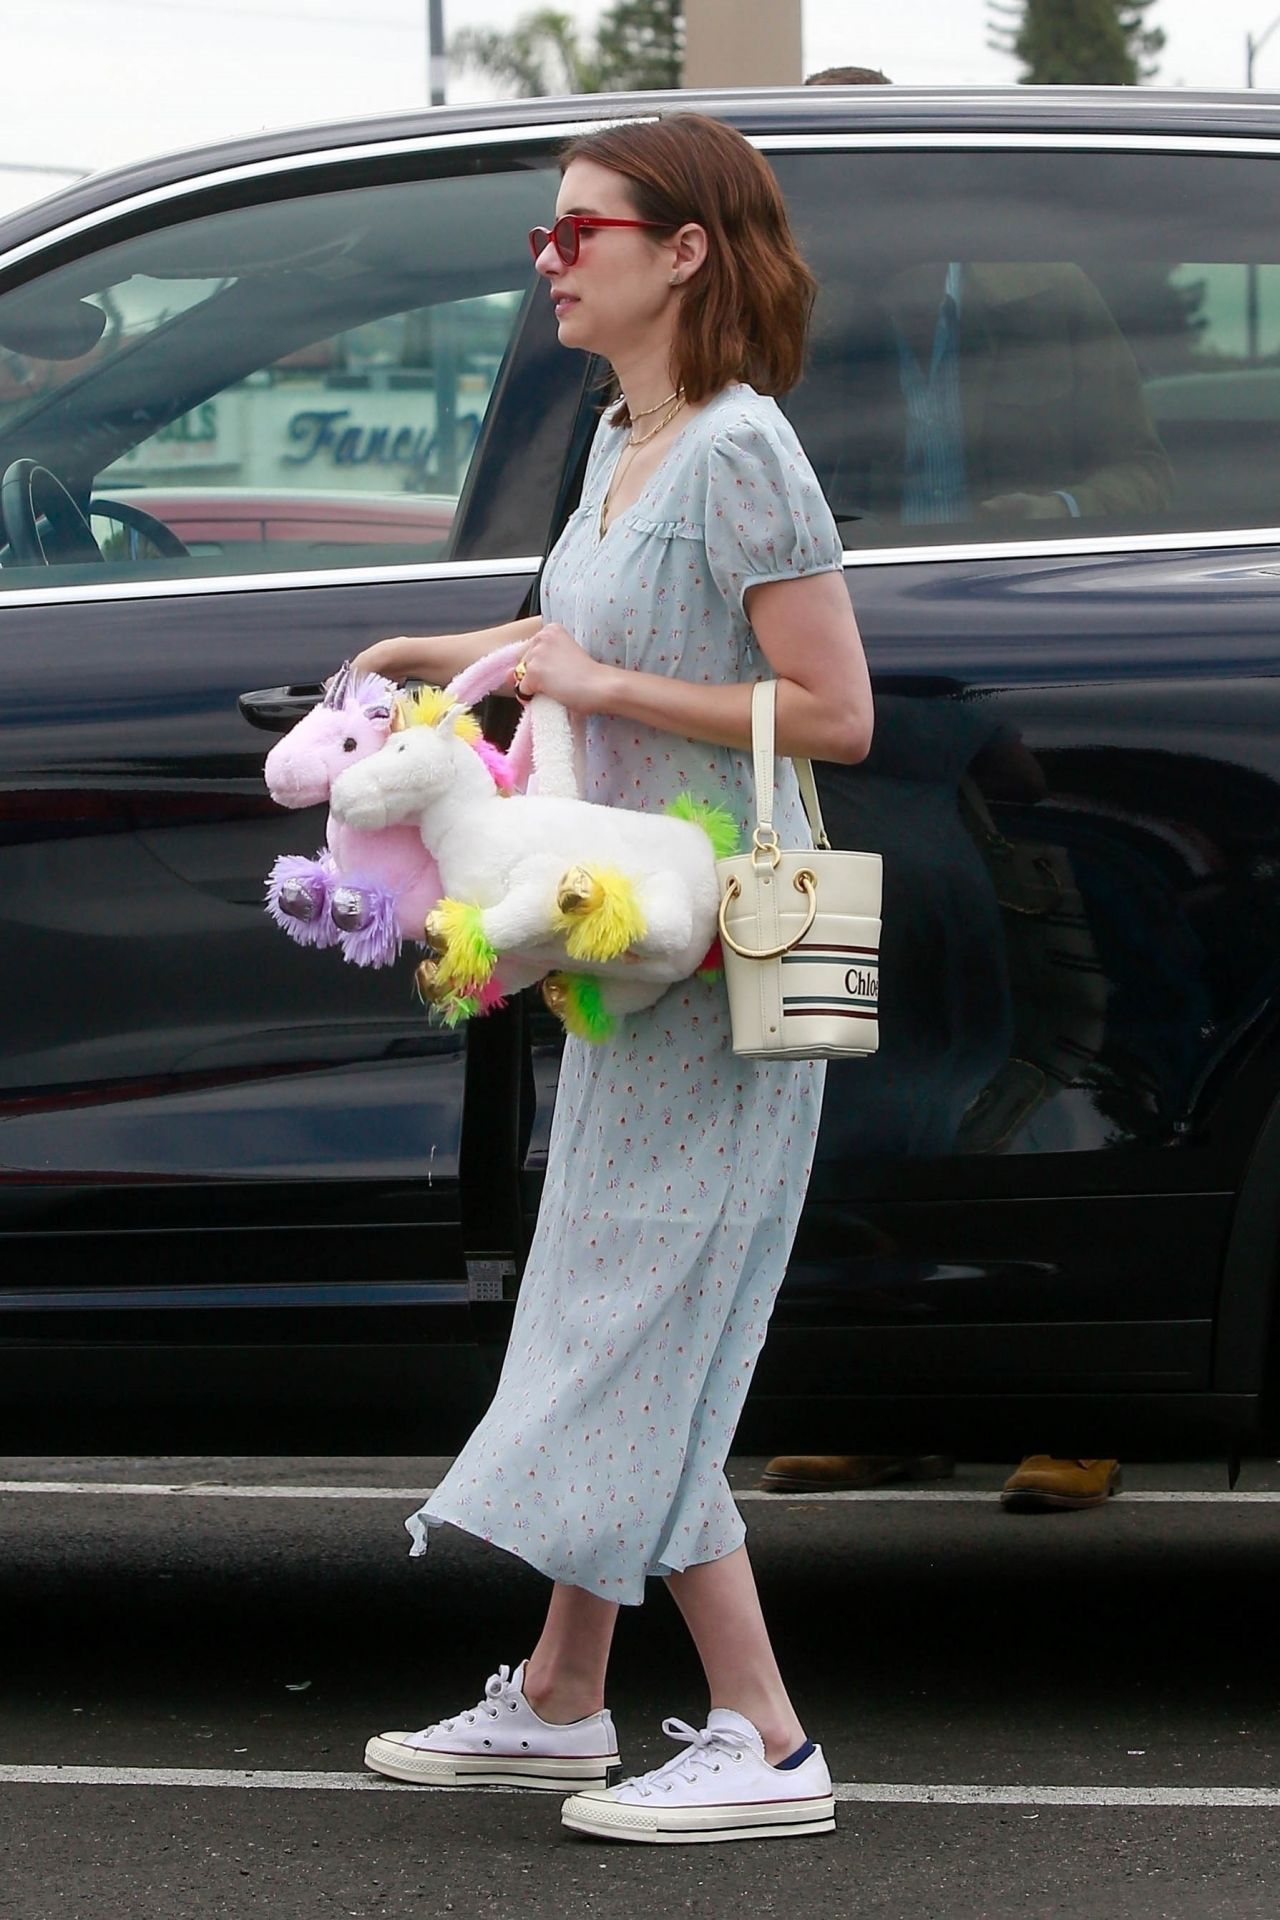 emma-roberts-shopping-on-easter-in-los-angeles-04-21-2019-9.jpg